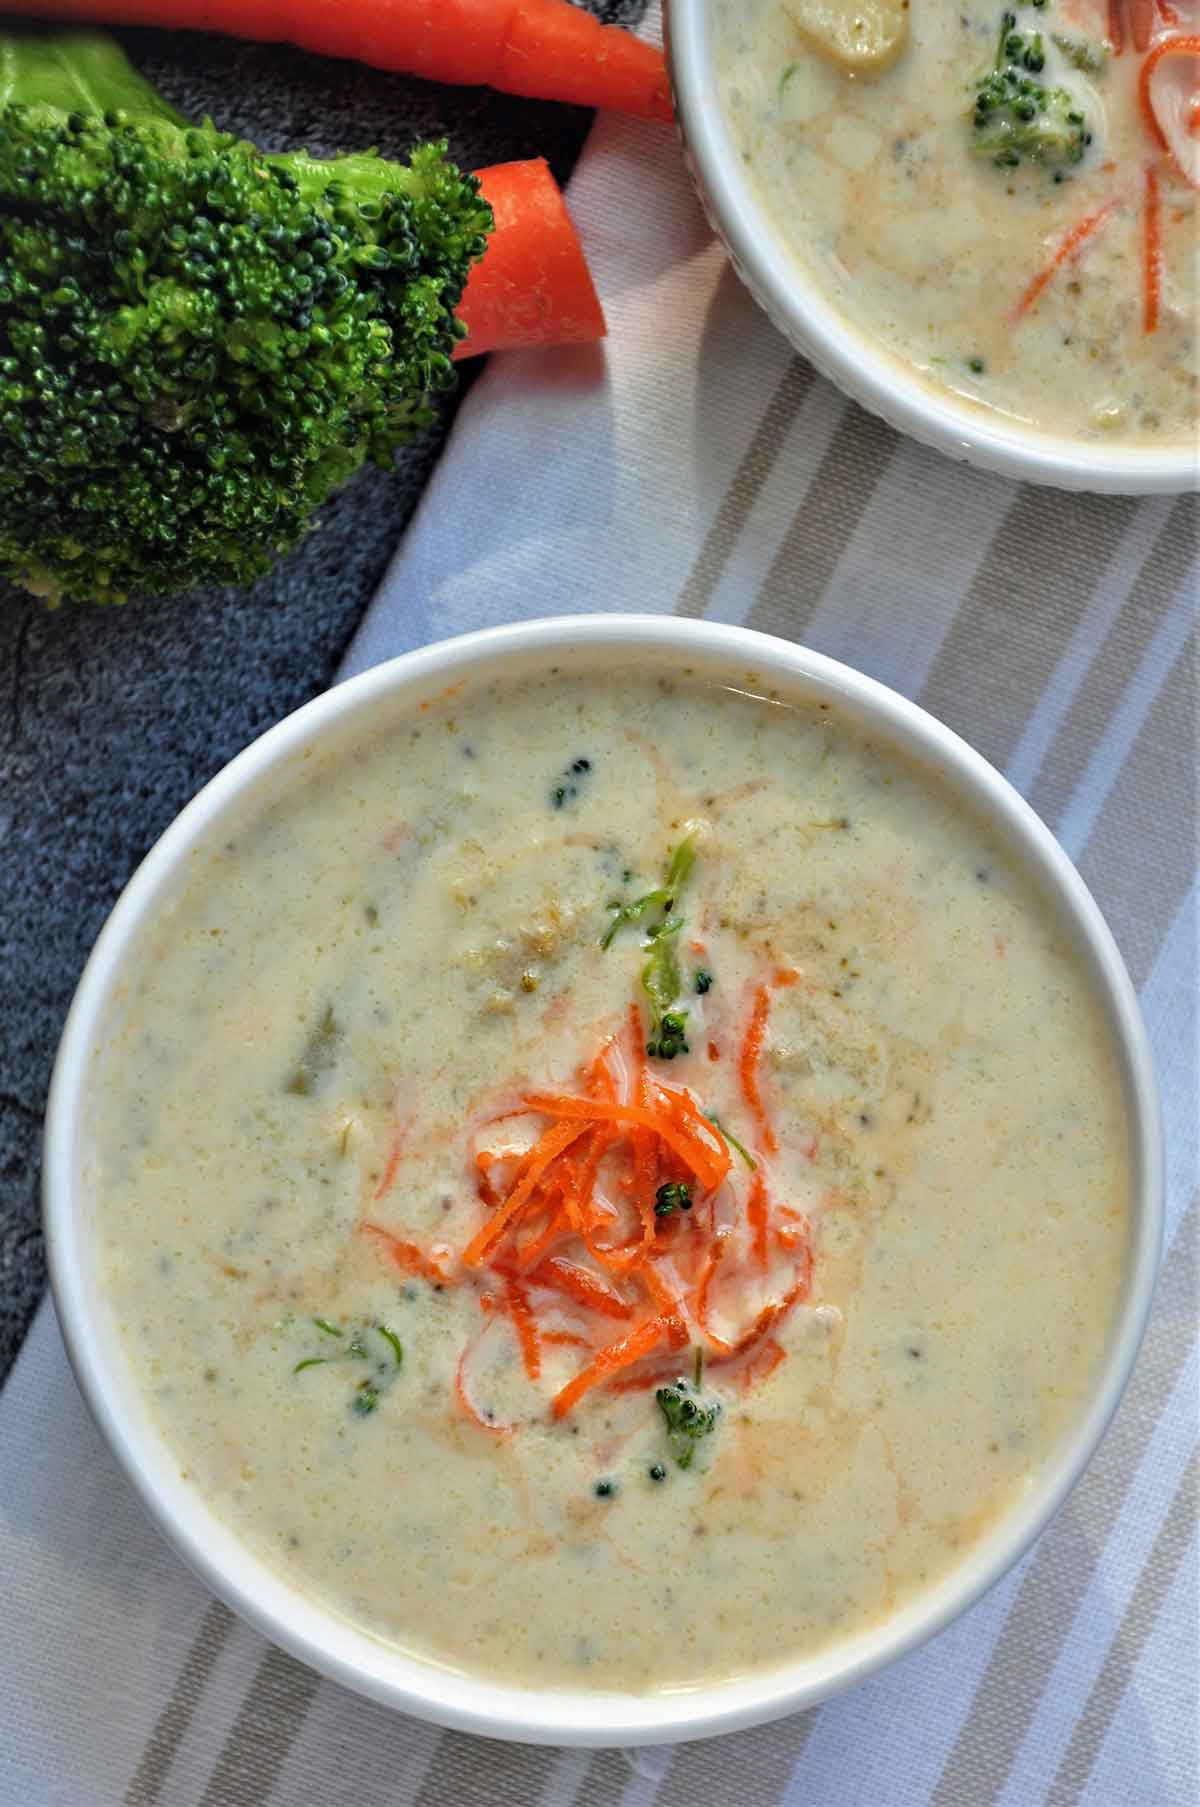 Broccoli cheese soup in a bowl.